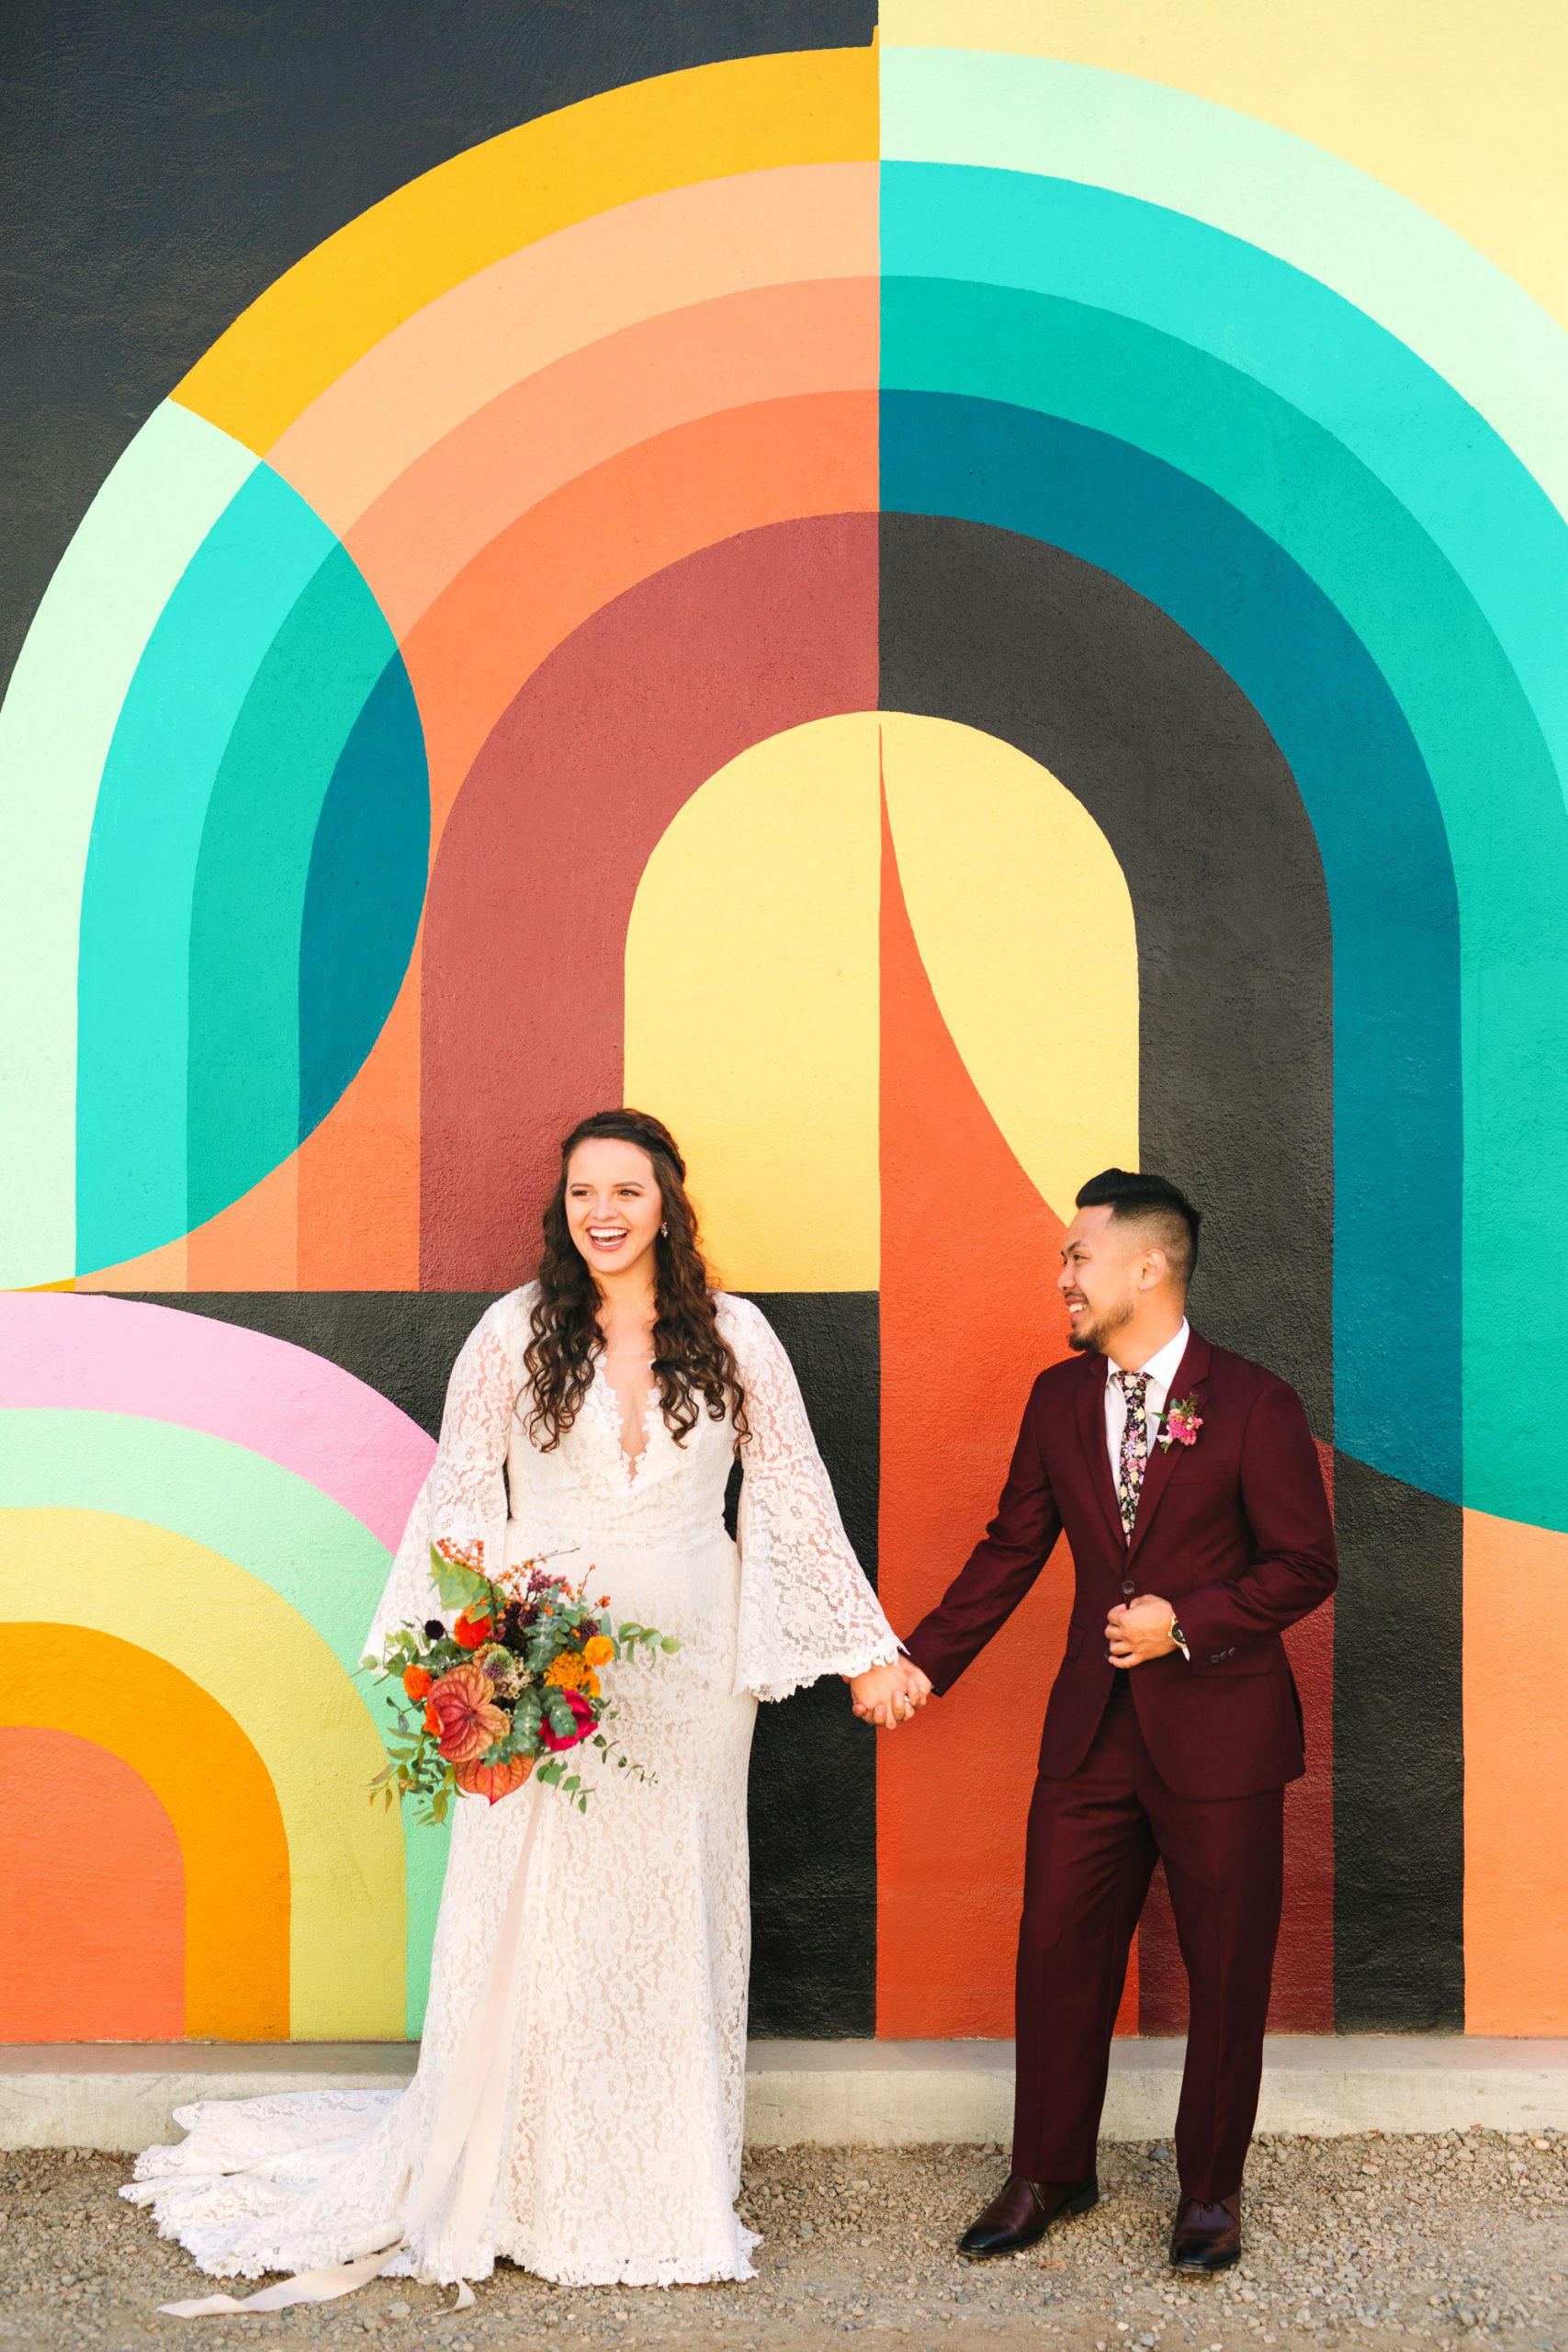 Joyful bride and groom in front of colorful Jessie and Katey mural in Sacramento - www.marycostaweddings.com